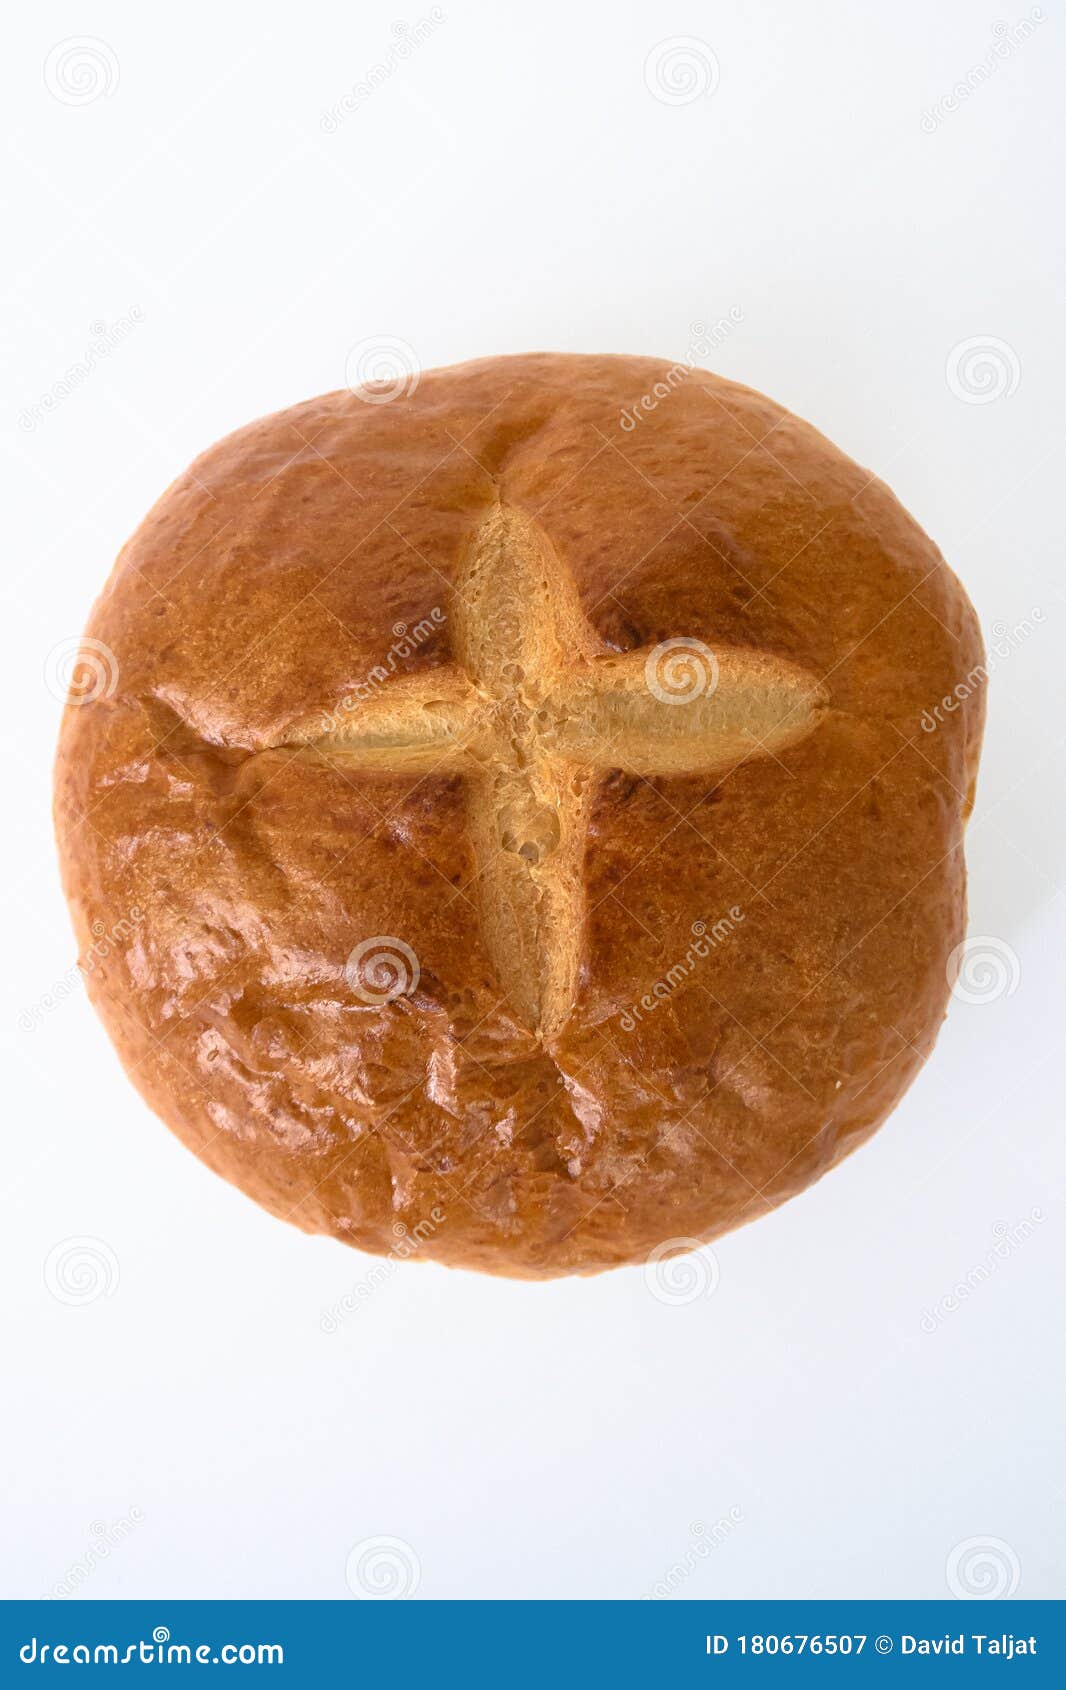 Easter bread with a cross stock image. Image of holiday - 180676507